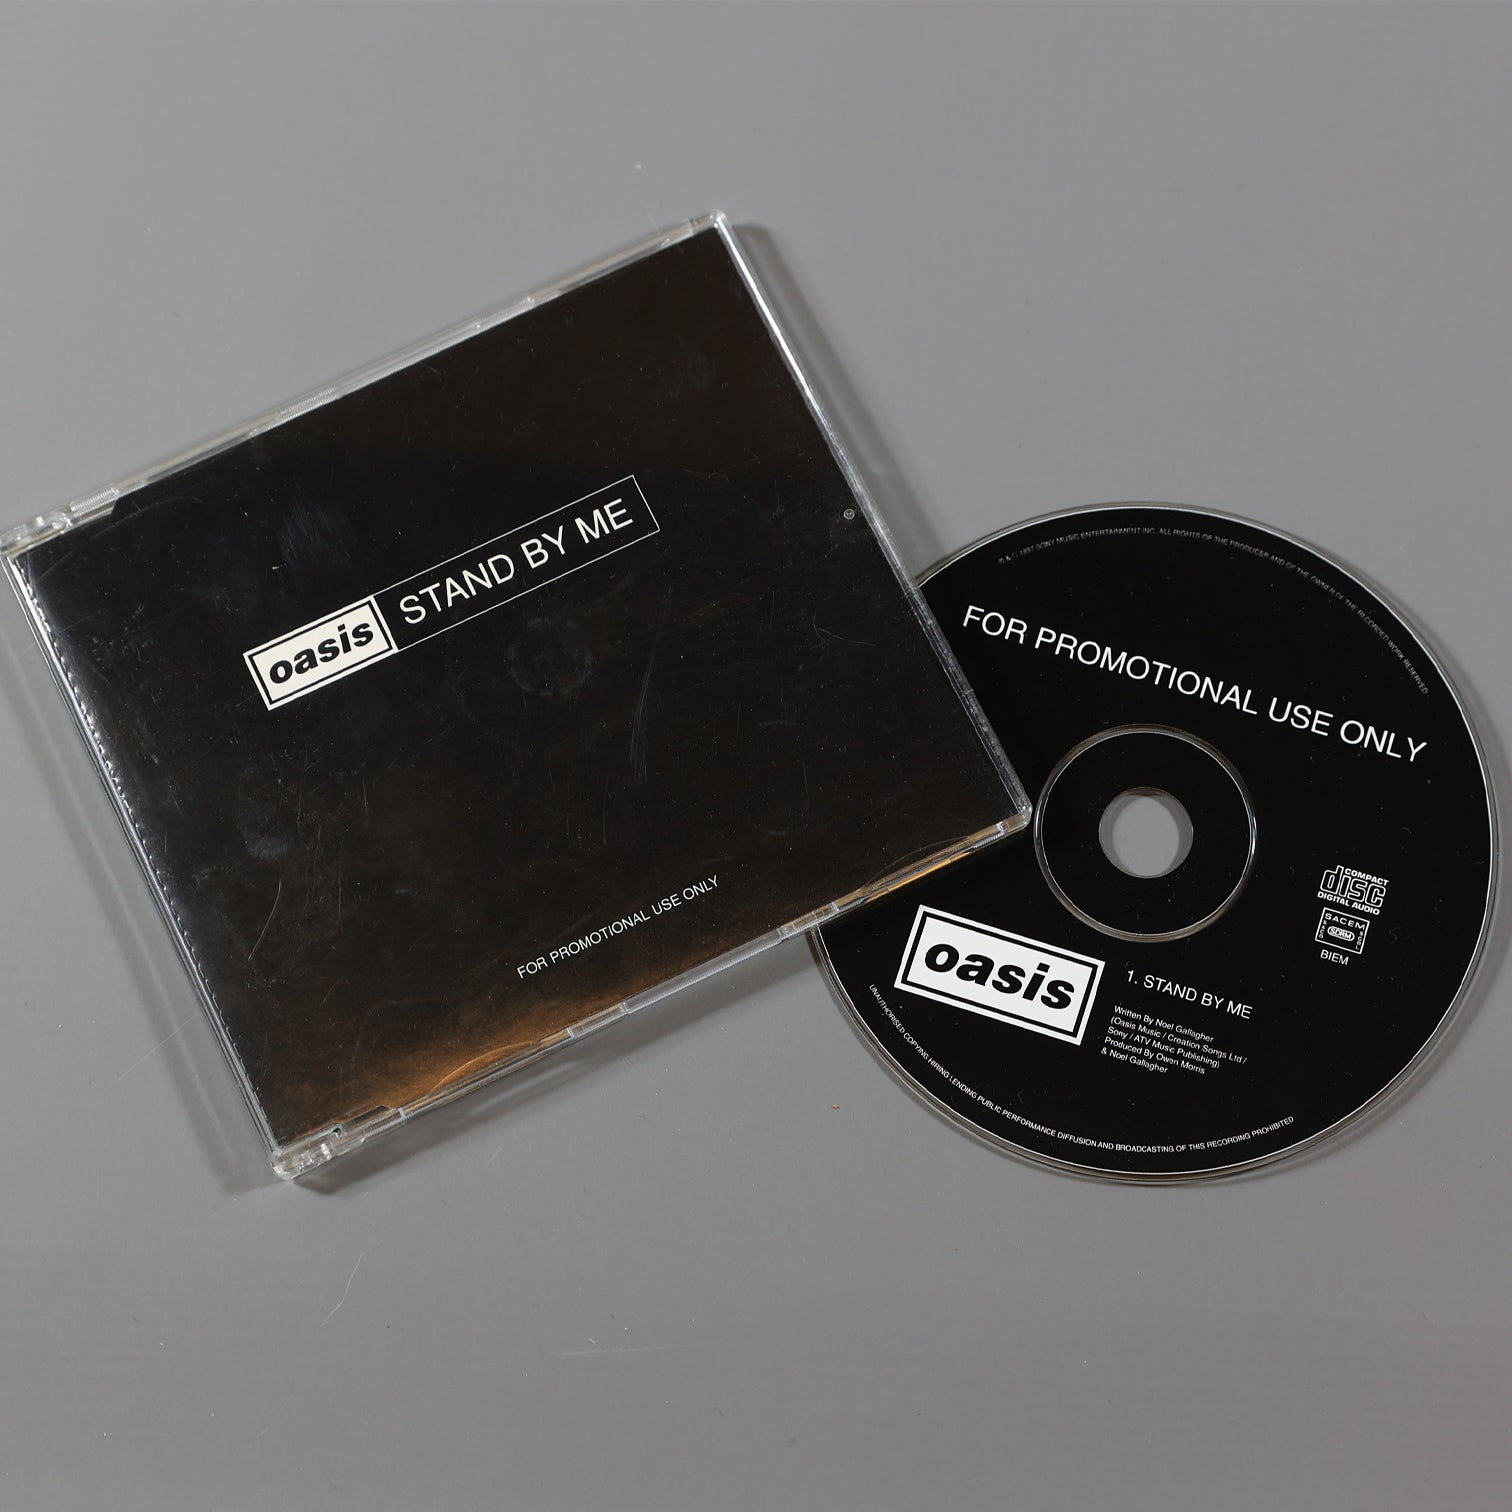 Oasis - Stand By Me Promo CD - New Item